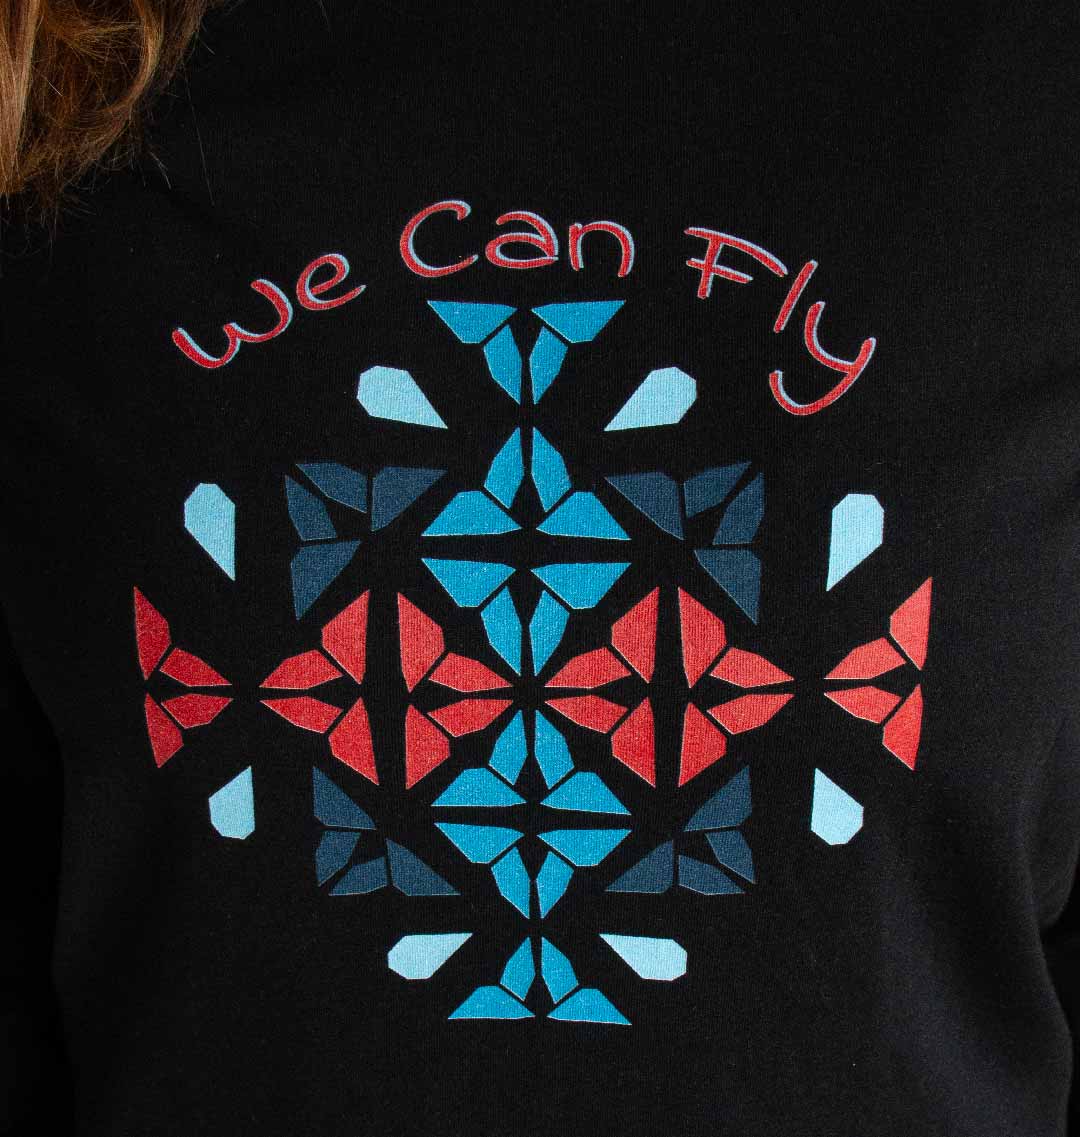 🦋 We Can Fly